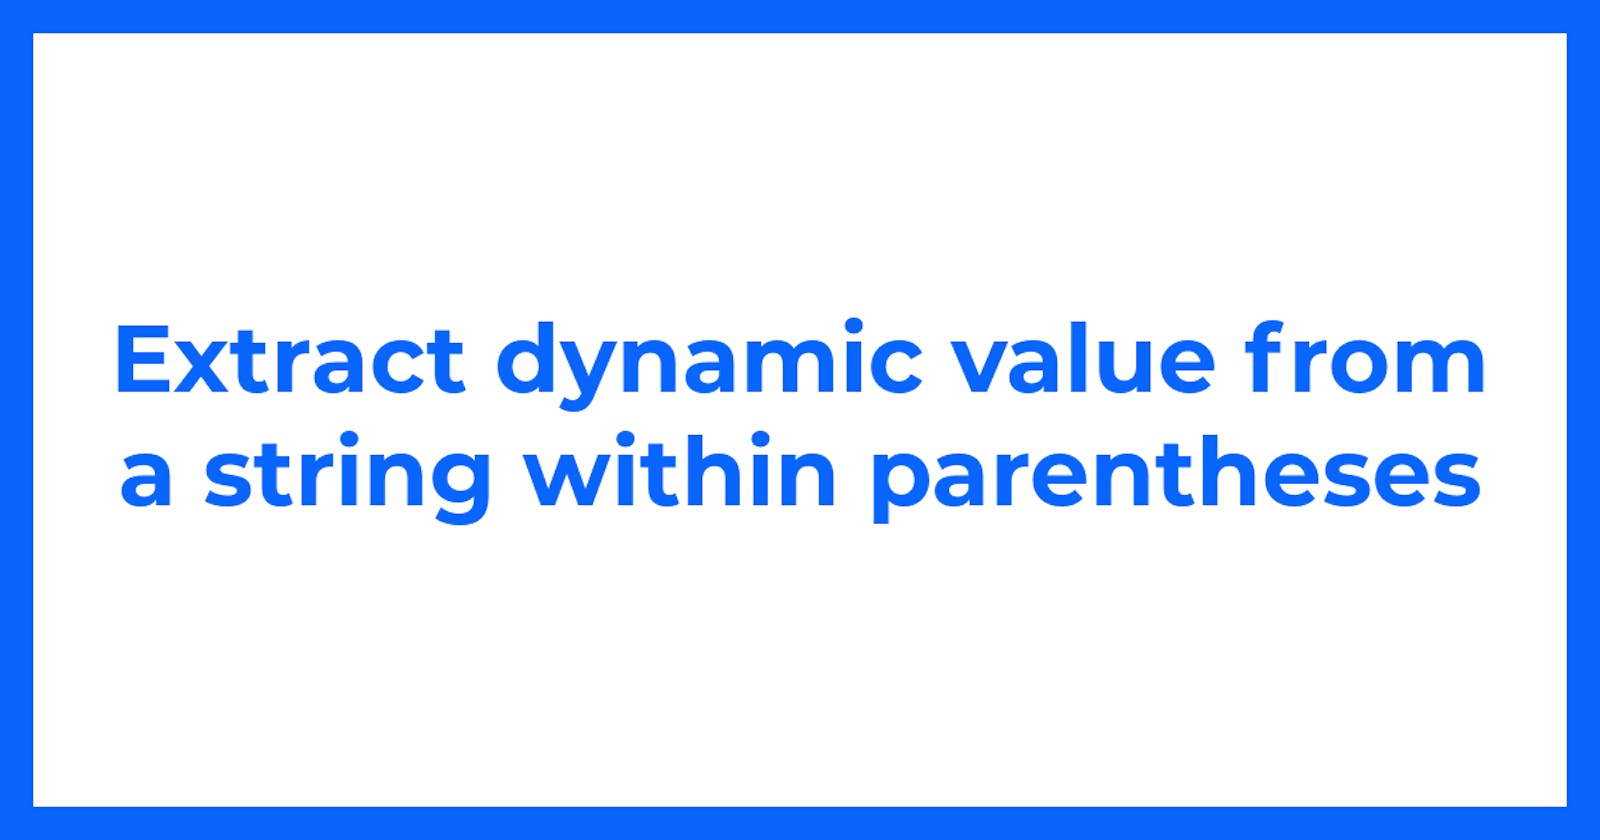 Extract dynamic value from a string within parentheses